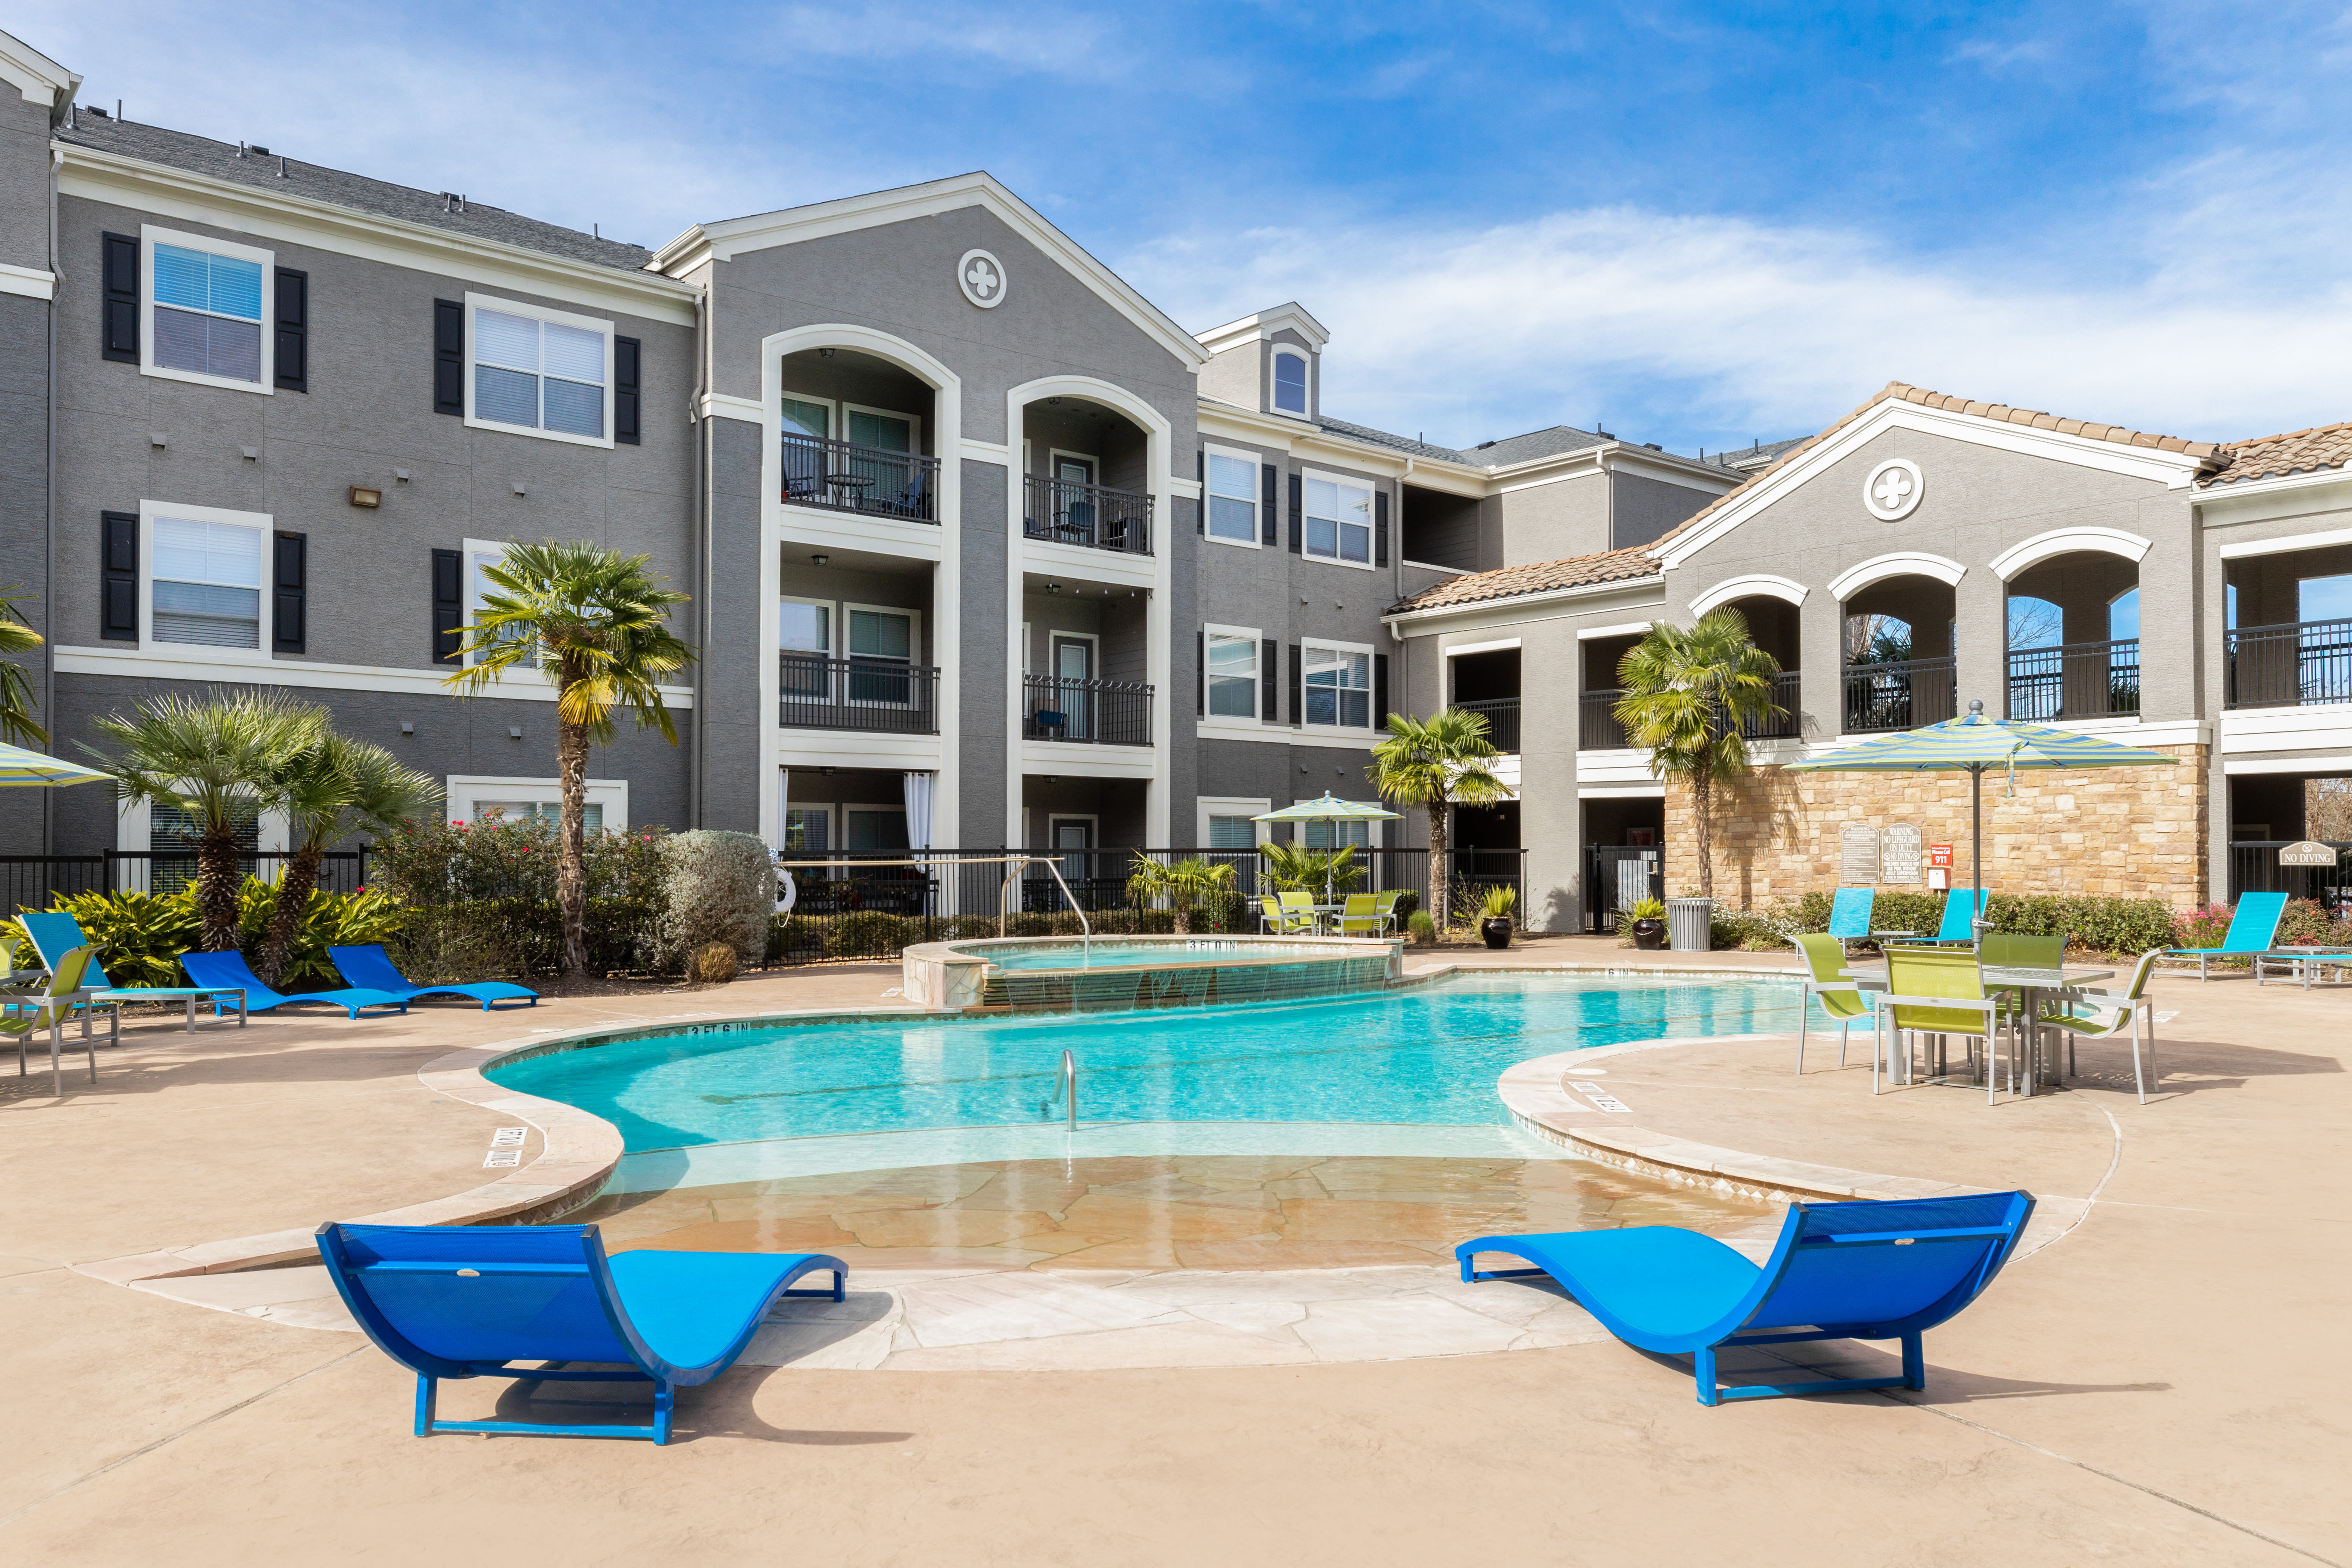 Learn more about The Abbey at Grande Oaks in San Antonio